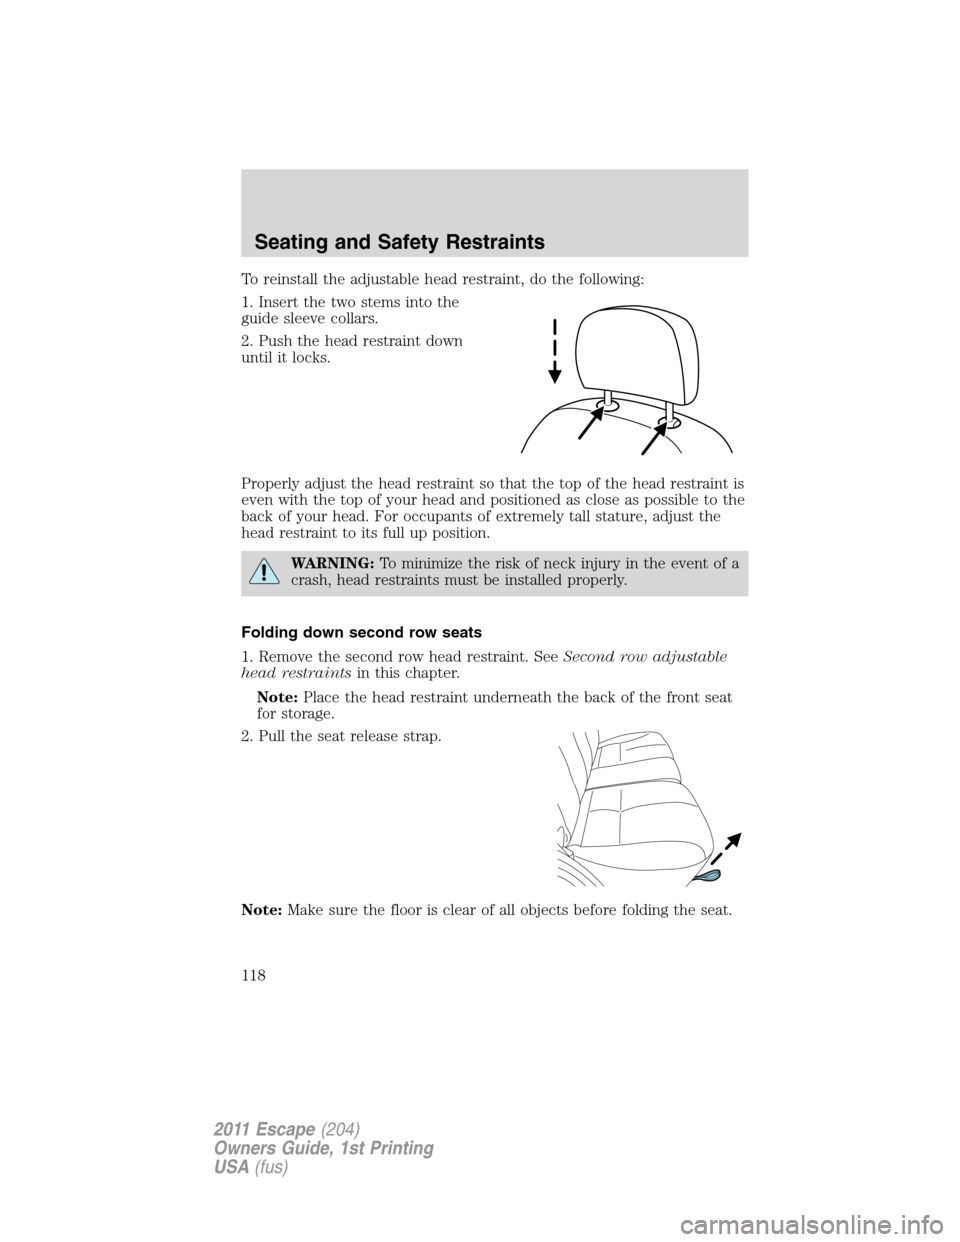 FORD ESCAPE 2011 2.G Service Manual To reinstall the adjustable head restraint, do the following:
1. Insert the two stems into the
guide sleeve collars.
2. Push the head restraint down
until it locks.
Properly adjust the head restraint 